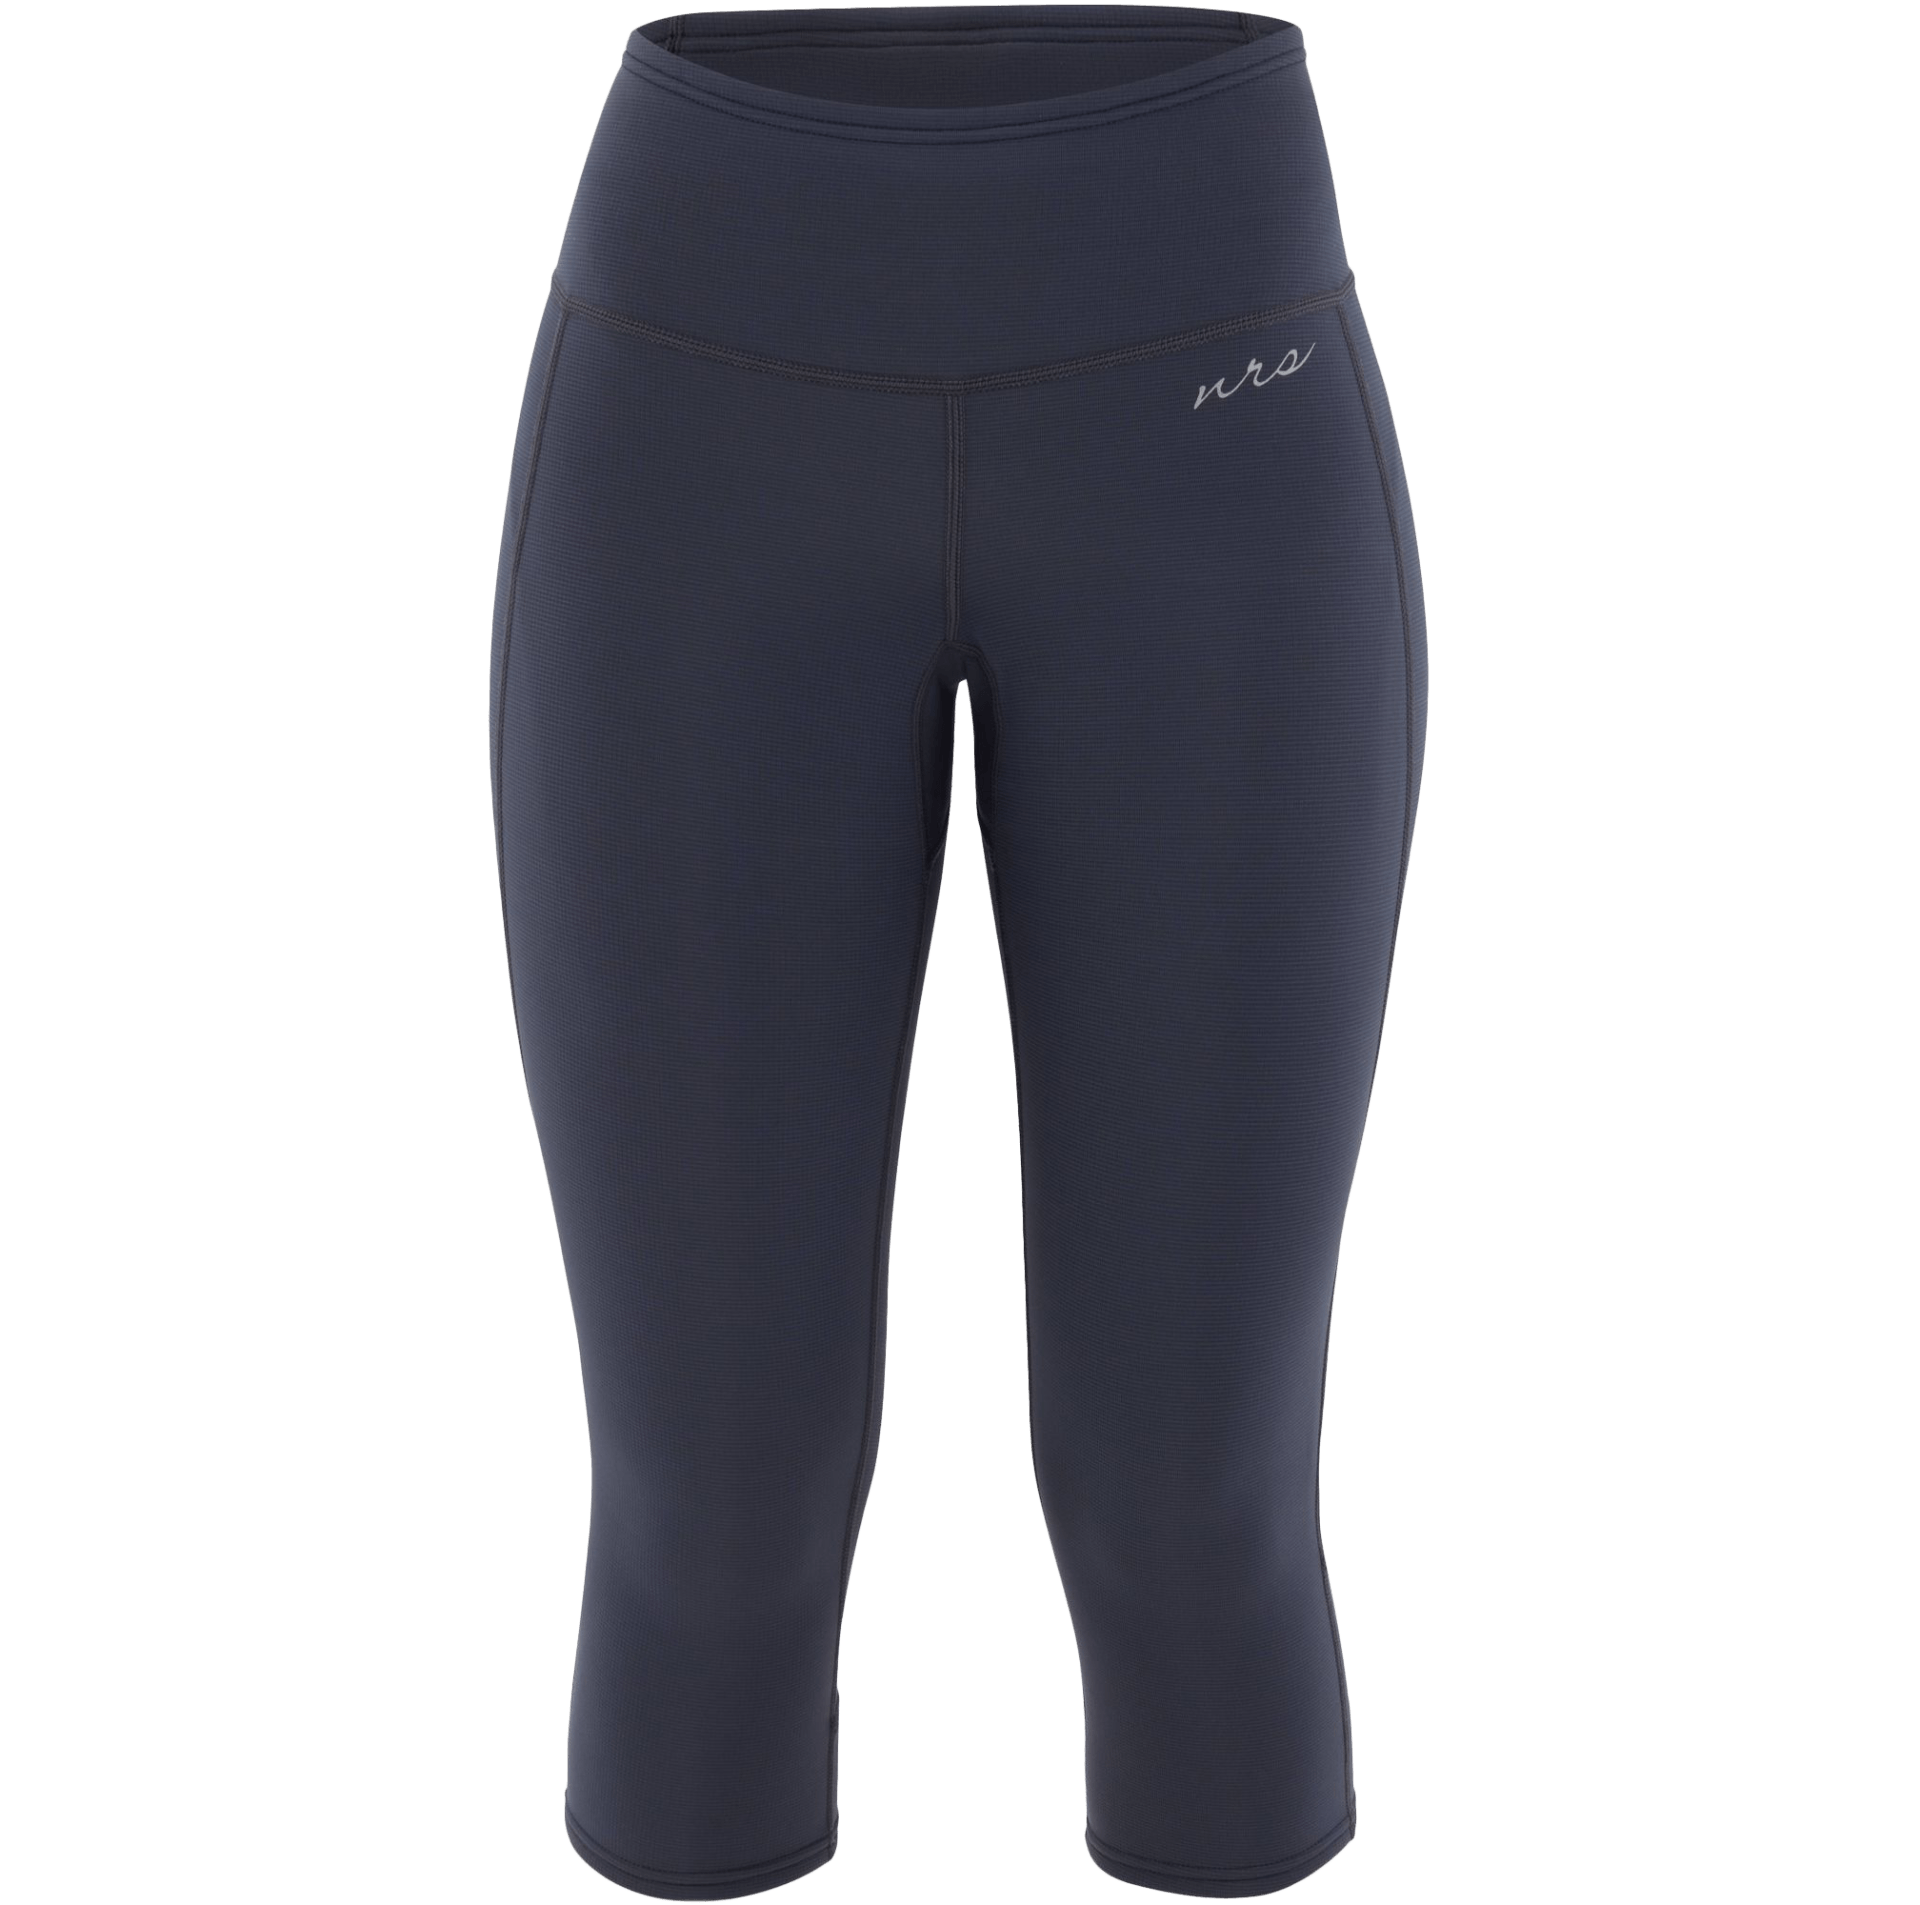 nrs_womens_hydroskin_05mm_capris_front.png